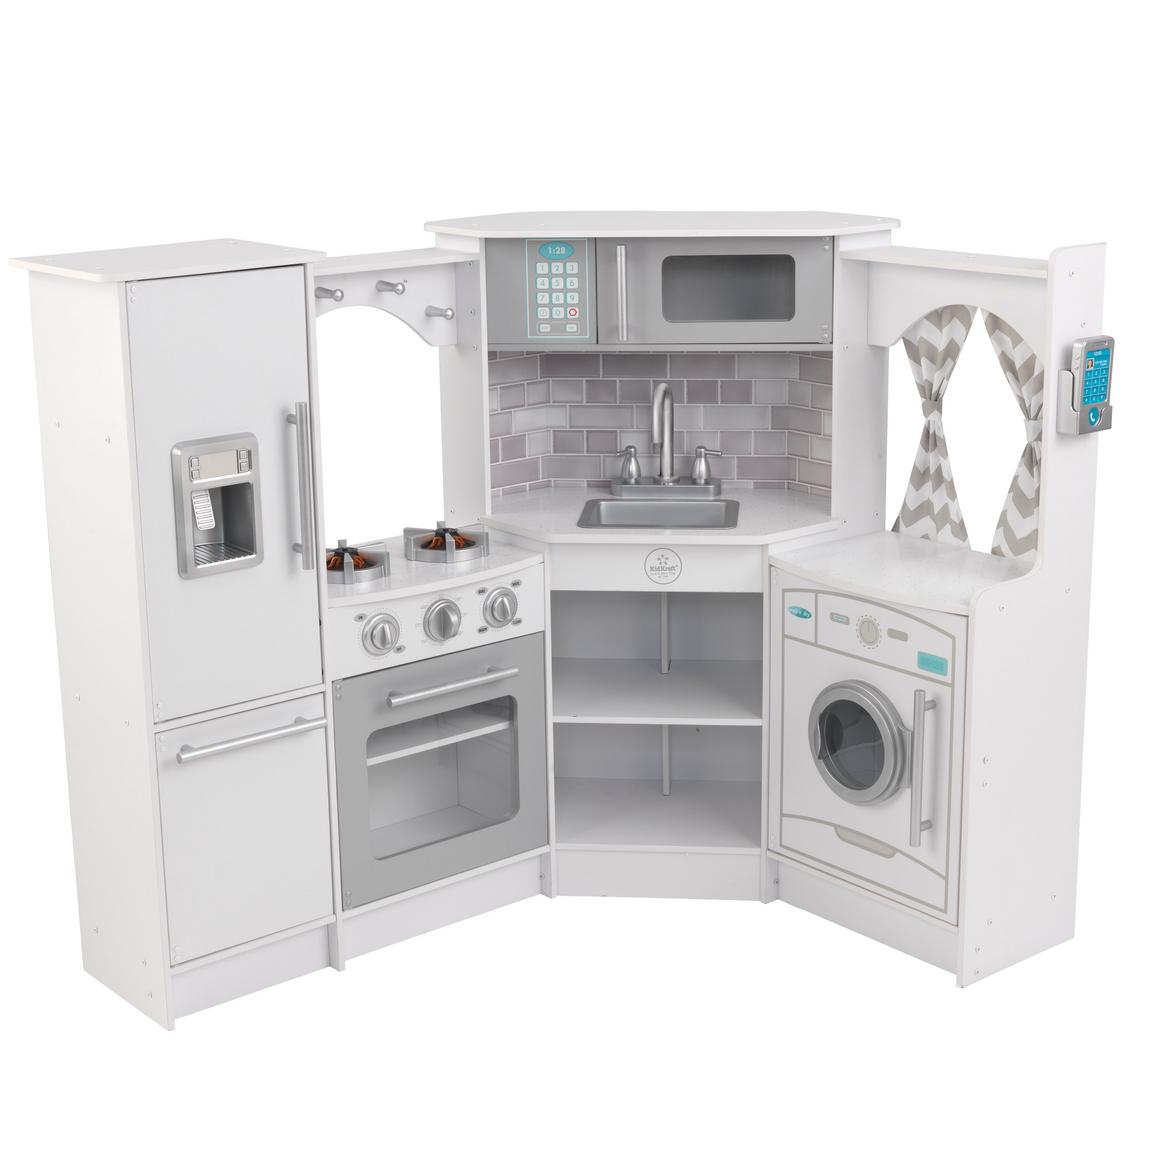 KidKraft Ultimate Corner Play Kitchen with Lights and Sounds White -  53386